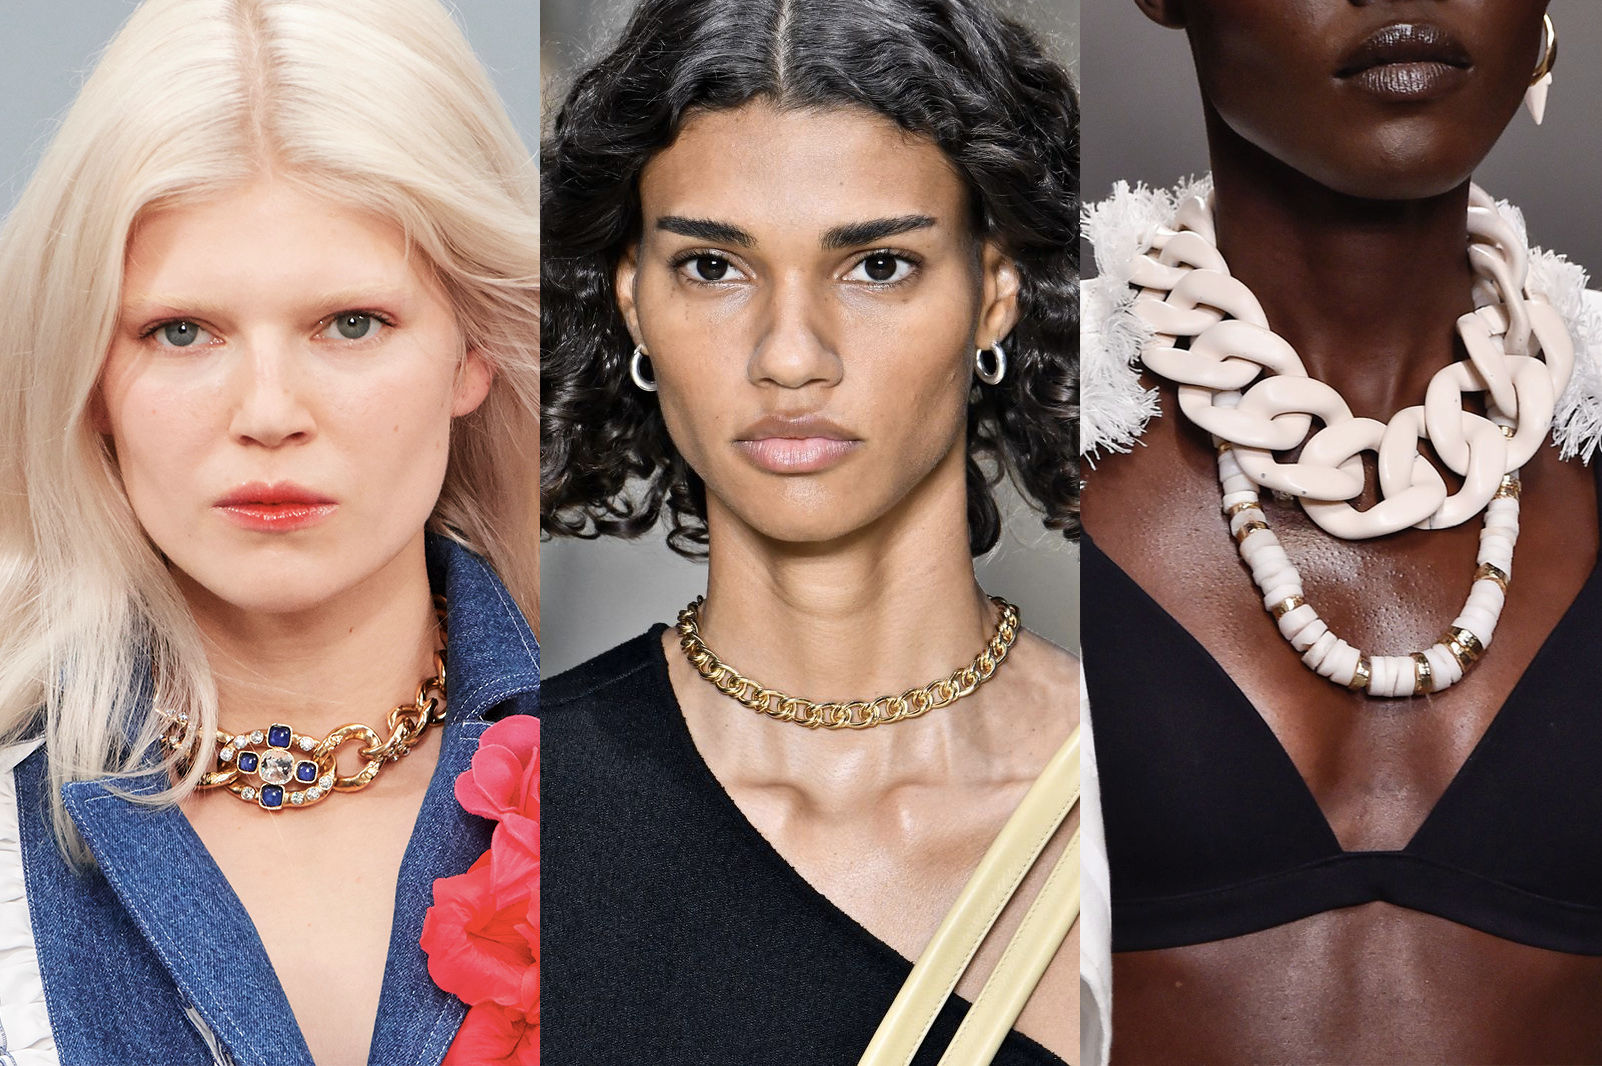 Chunky Chain-Link Necklace Trend 2019